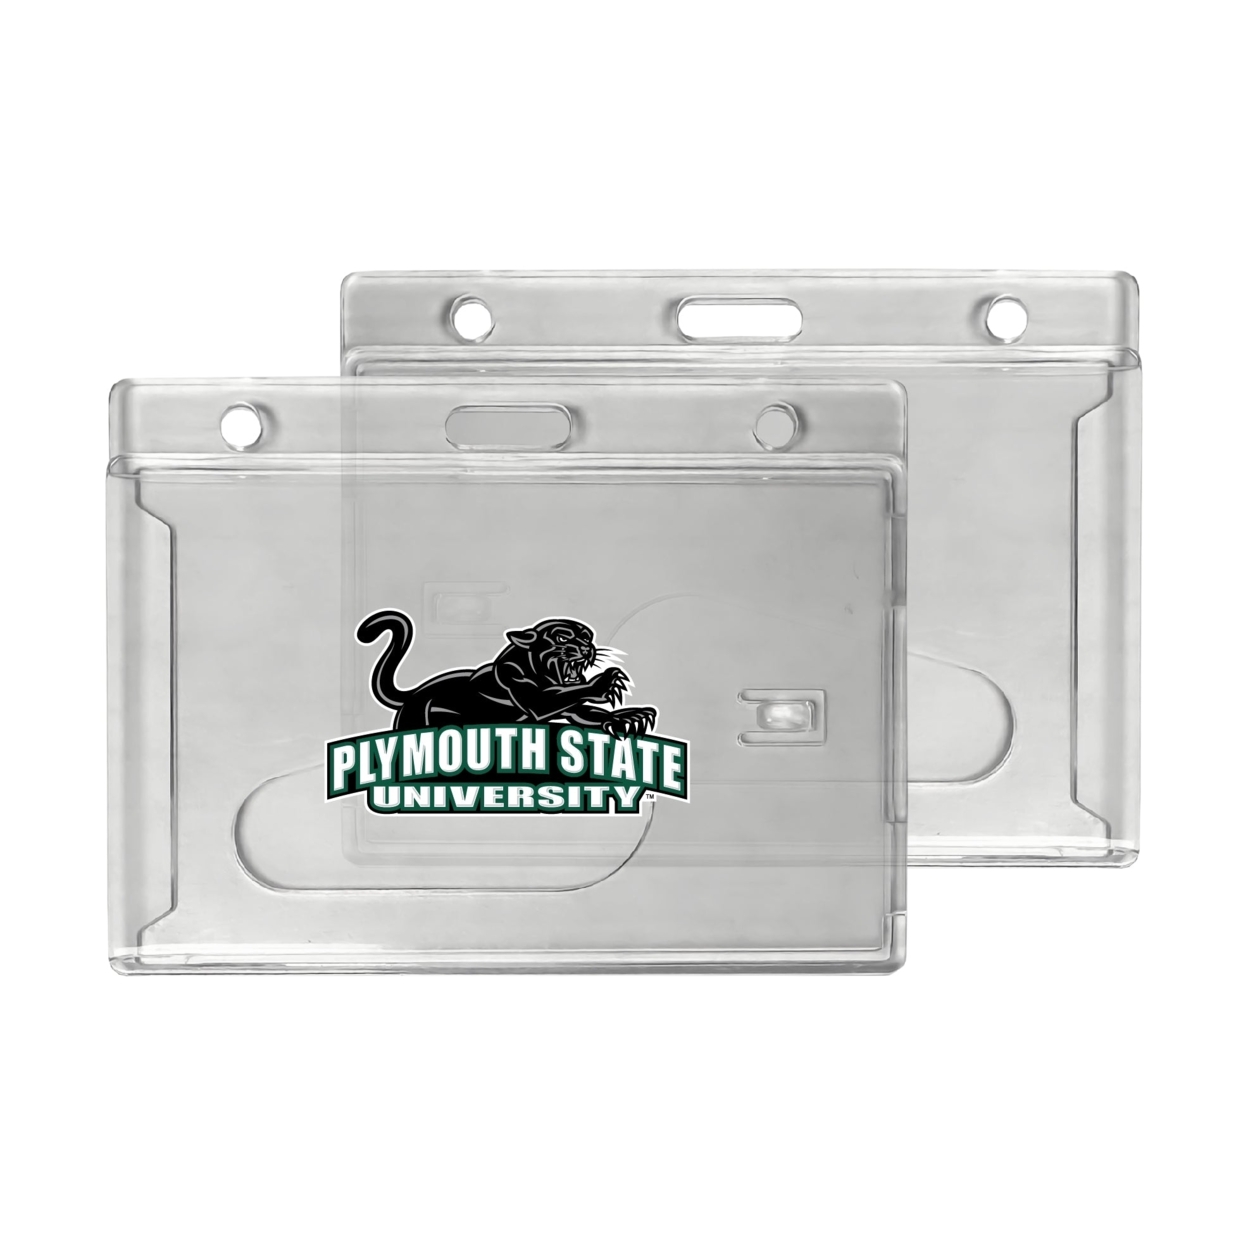 Plymouth State University Clear View ID Holder